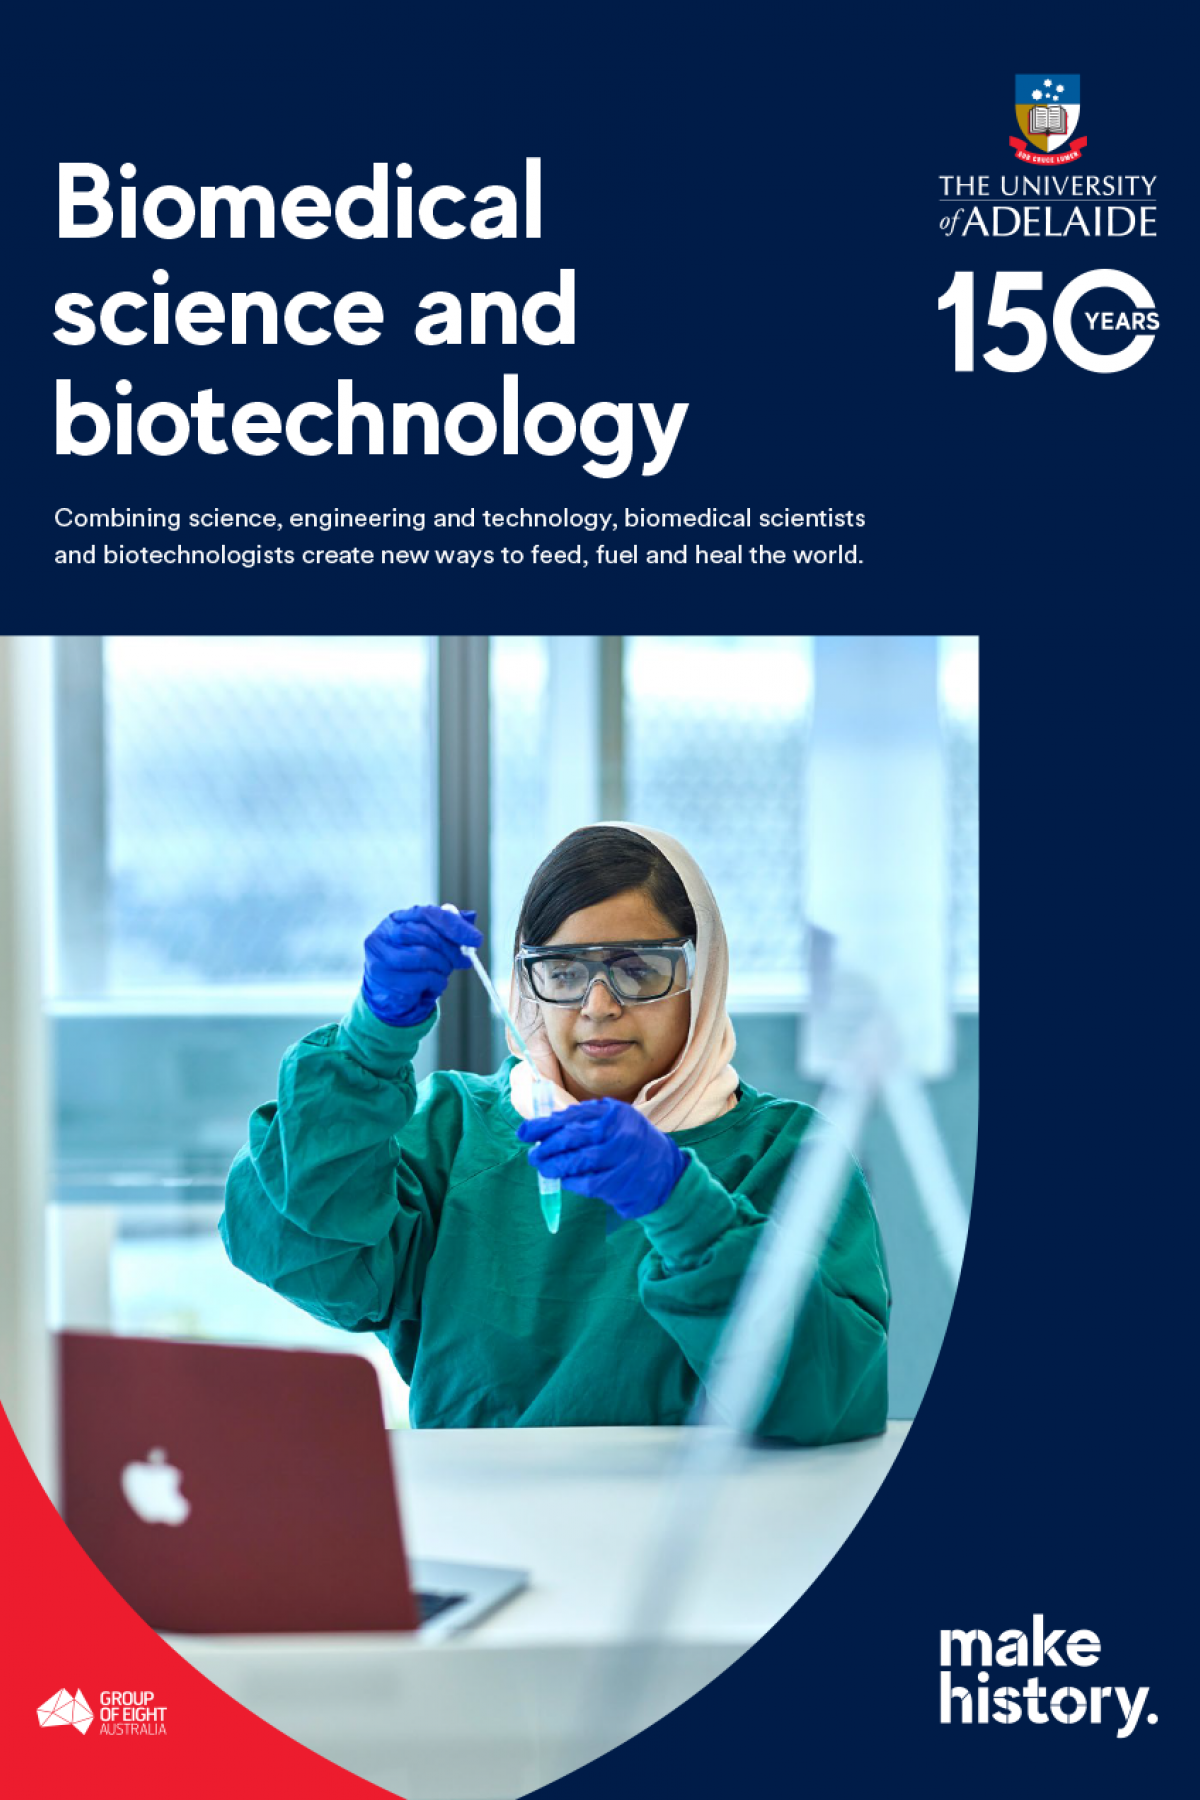 Biomedical Science and Biotechnology flyer